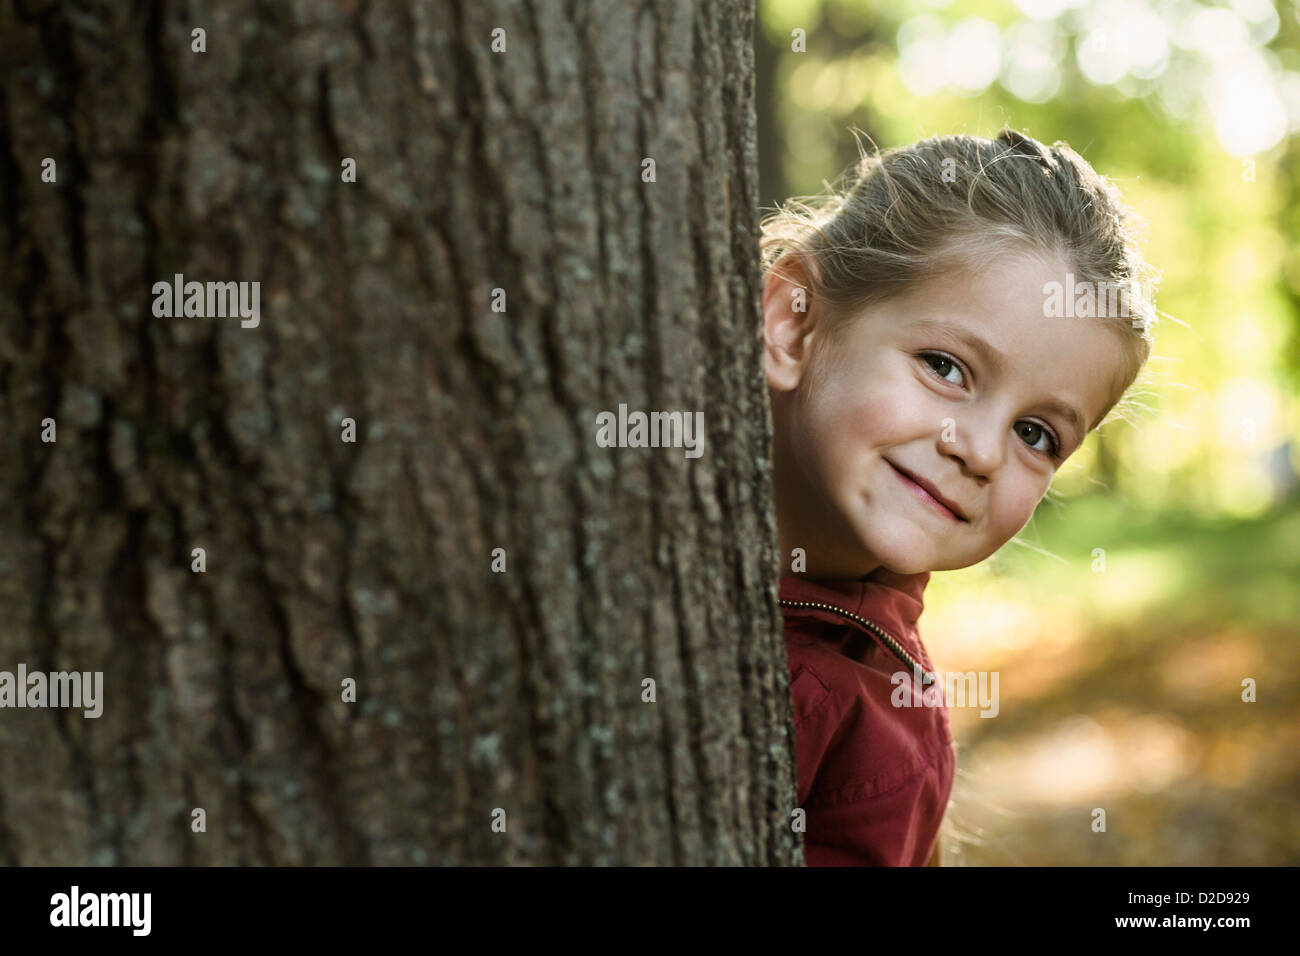 A young smiling girl peeking from behind a tree trunk Stock Photo